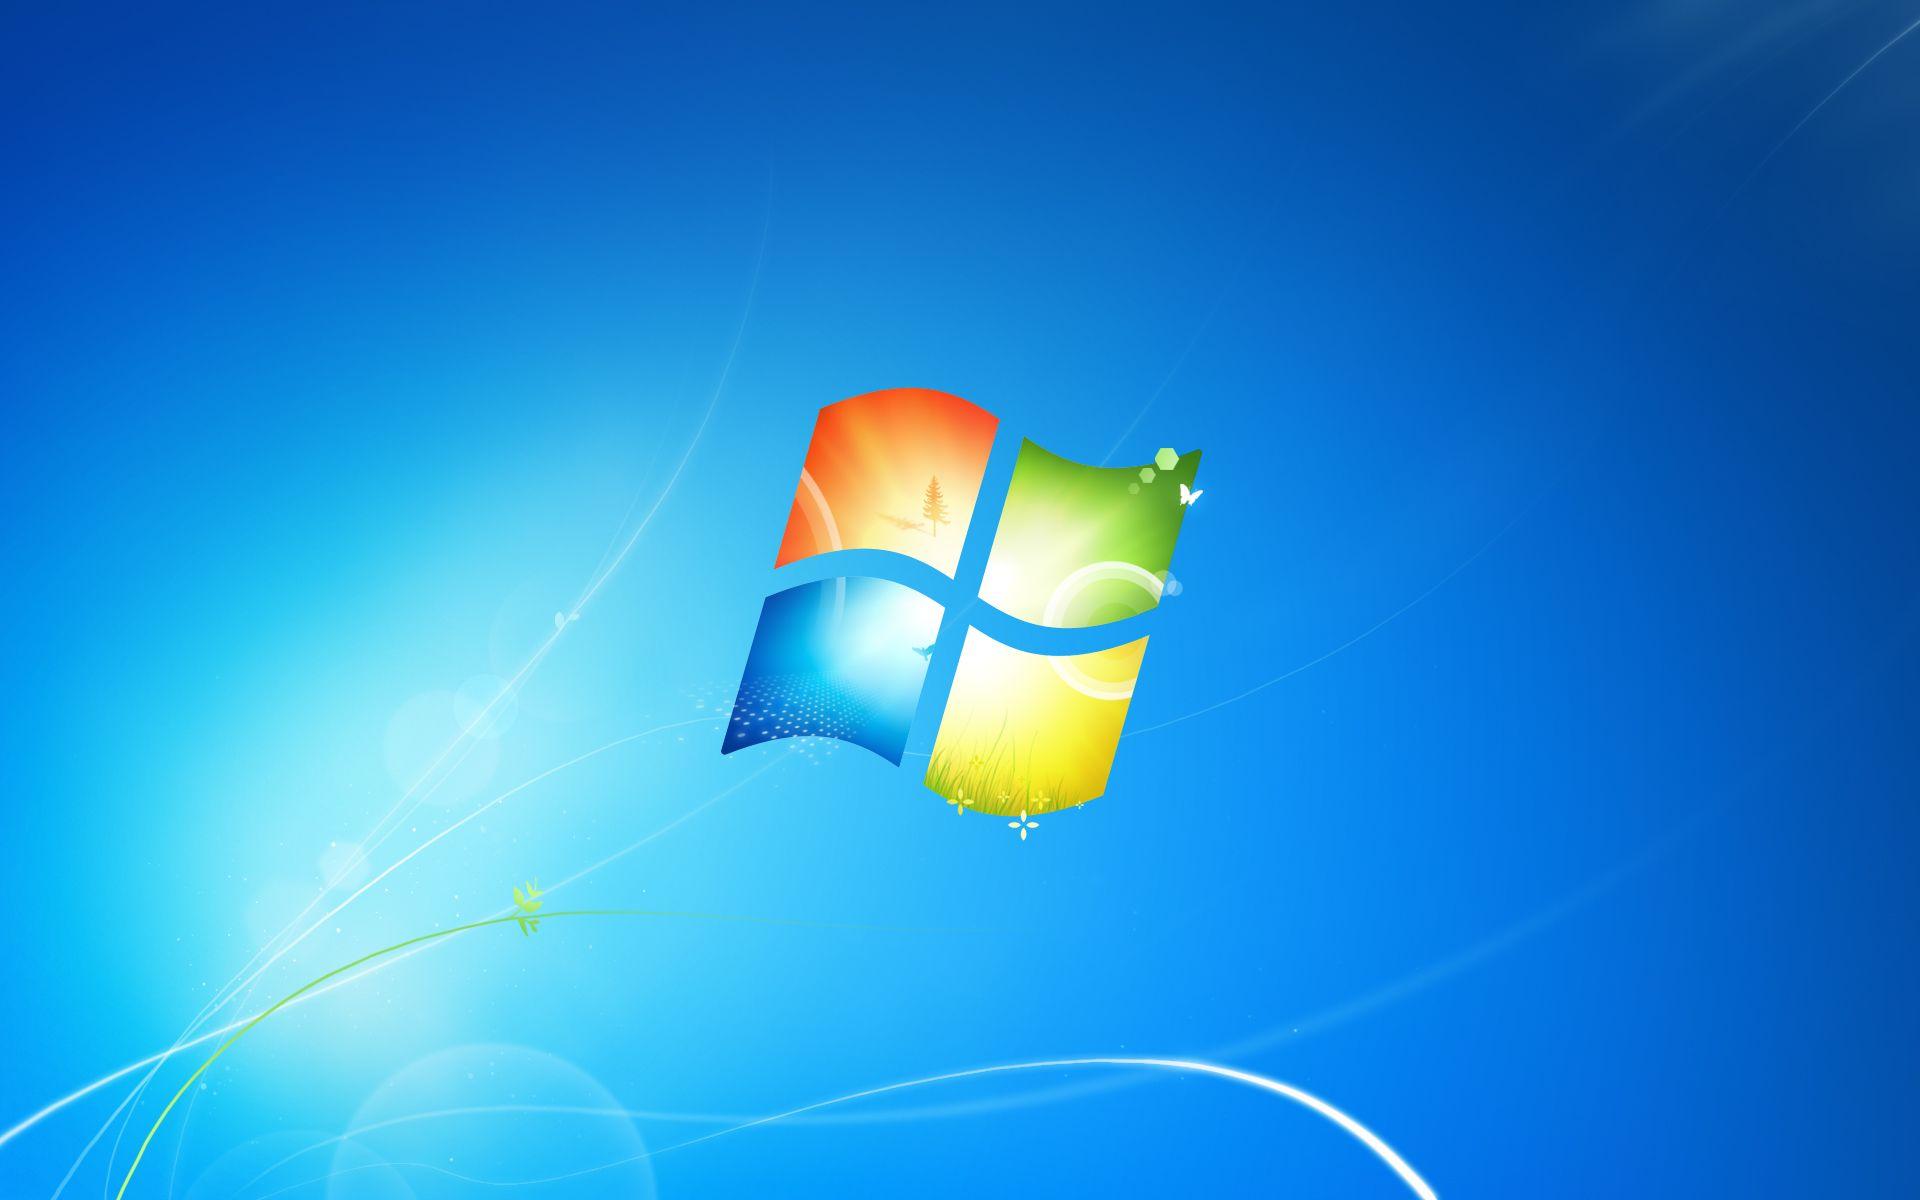 Official Windows 7 Wallpapers